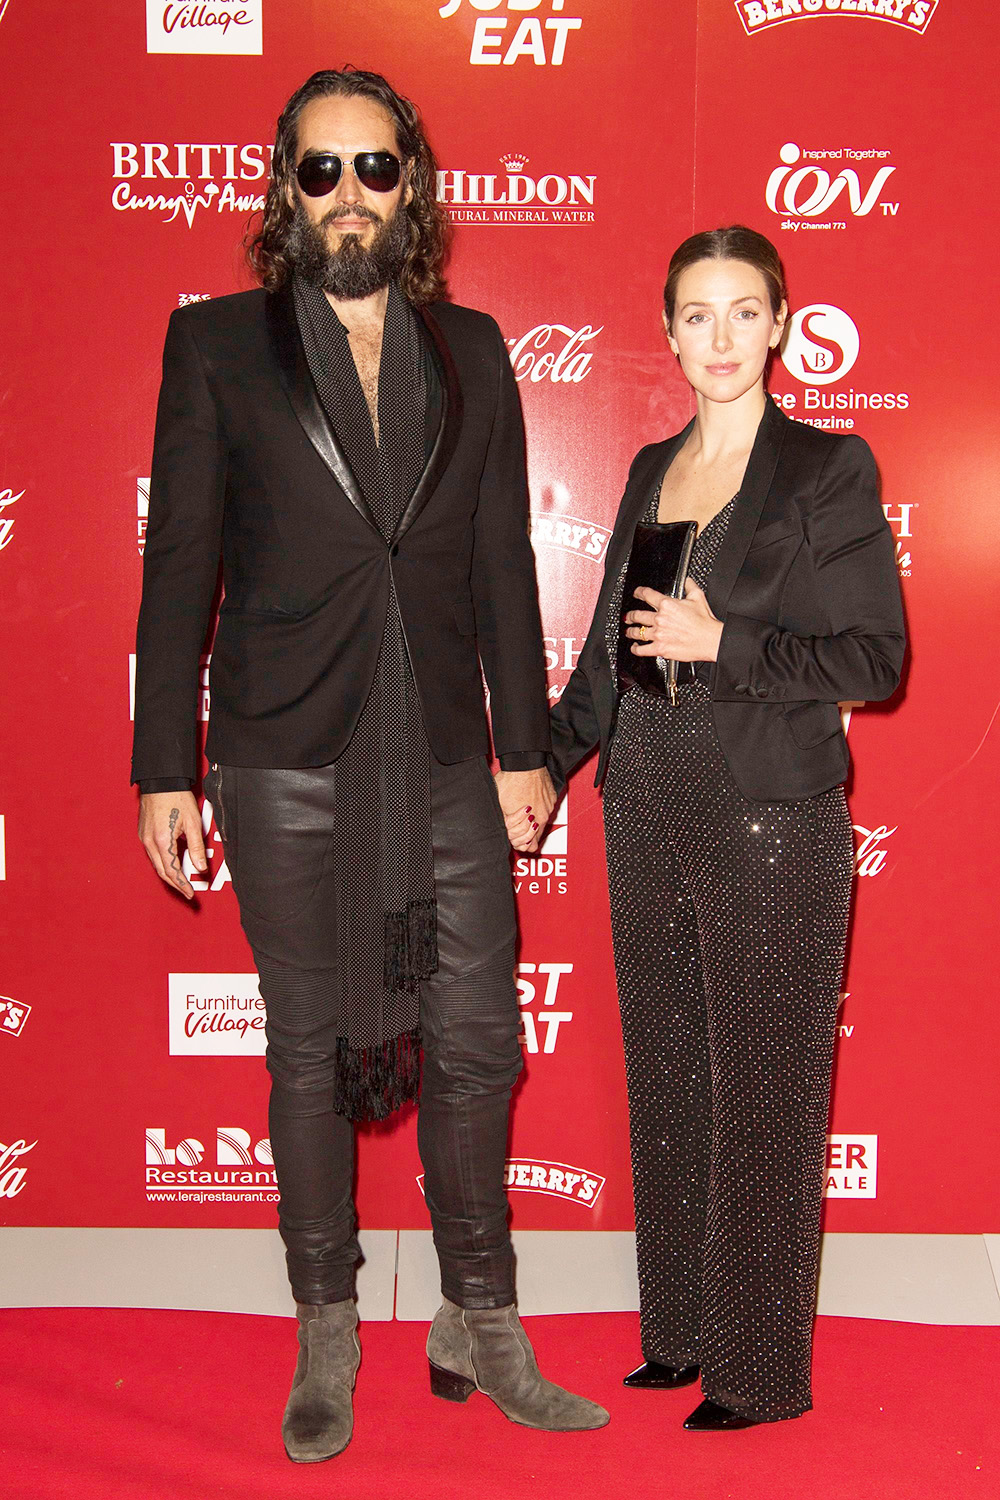 Russell Brand's Age Gap With Wife Laura Is Larger Than We Thought